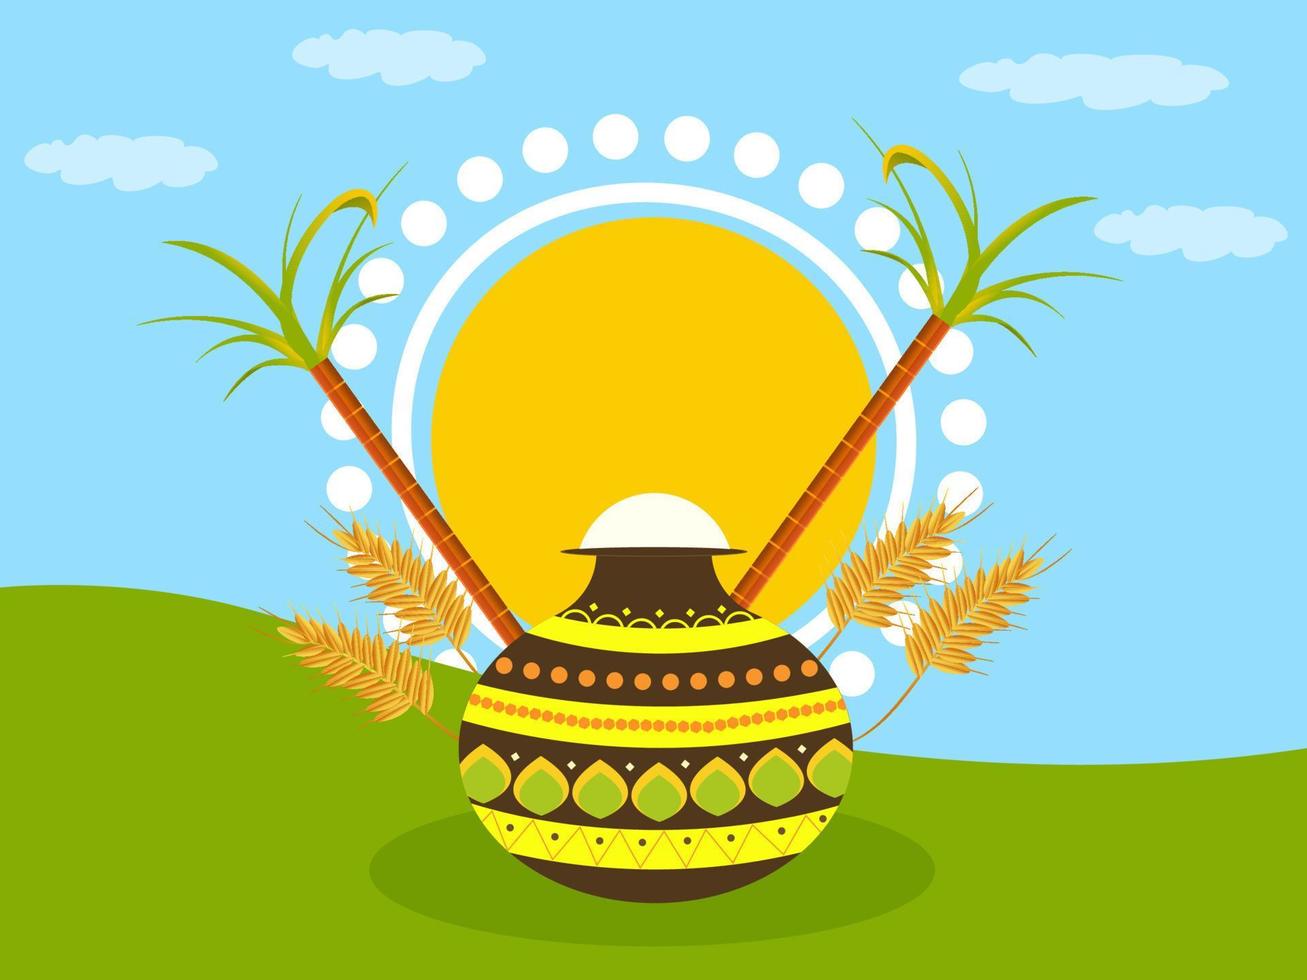 Illustration Of Grain Mud Pot With Wheat Ears, Sugarcane, Sun View On Blue And Green Background. vector